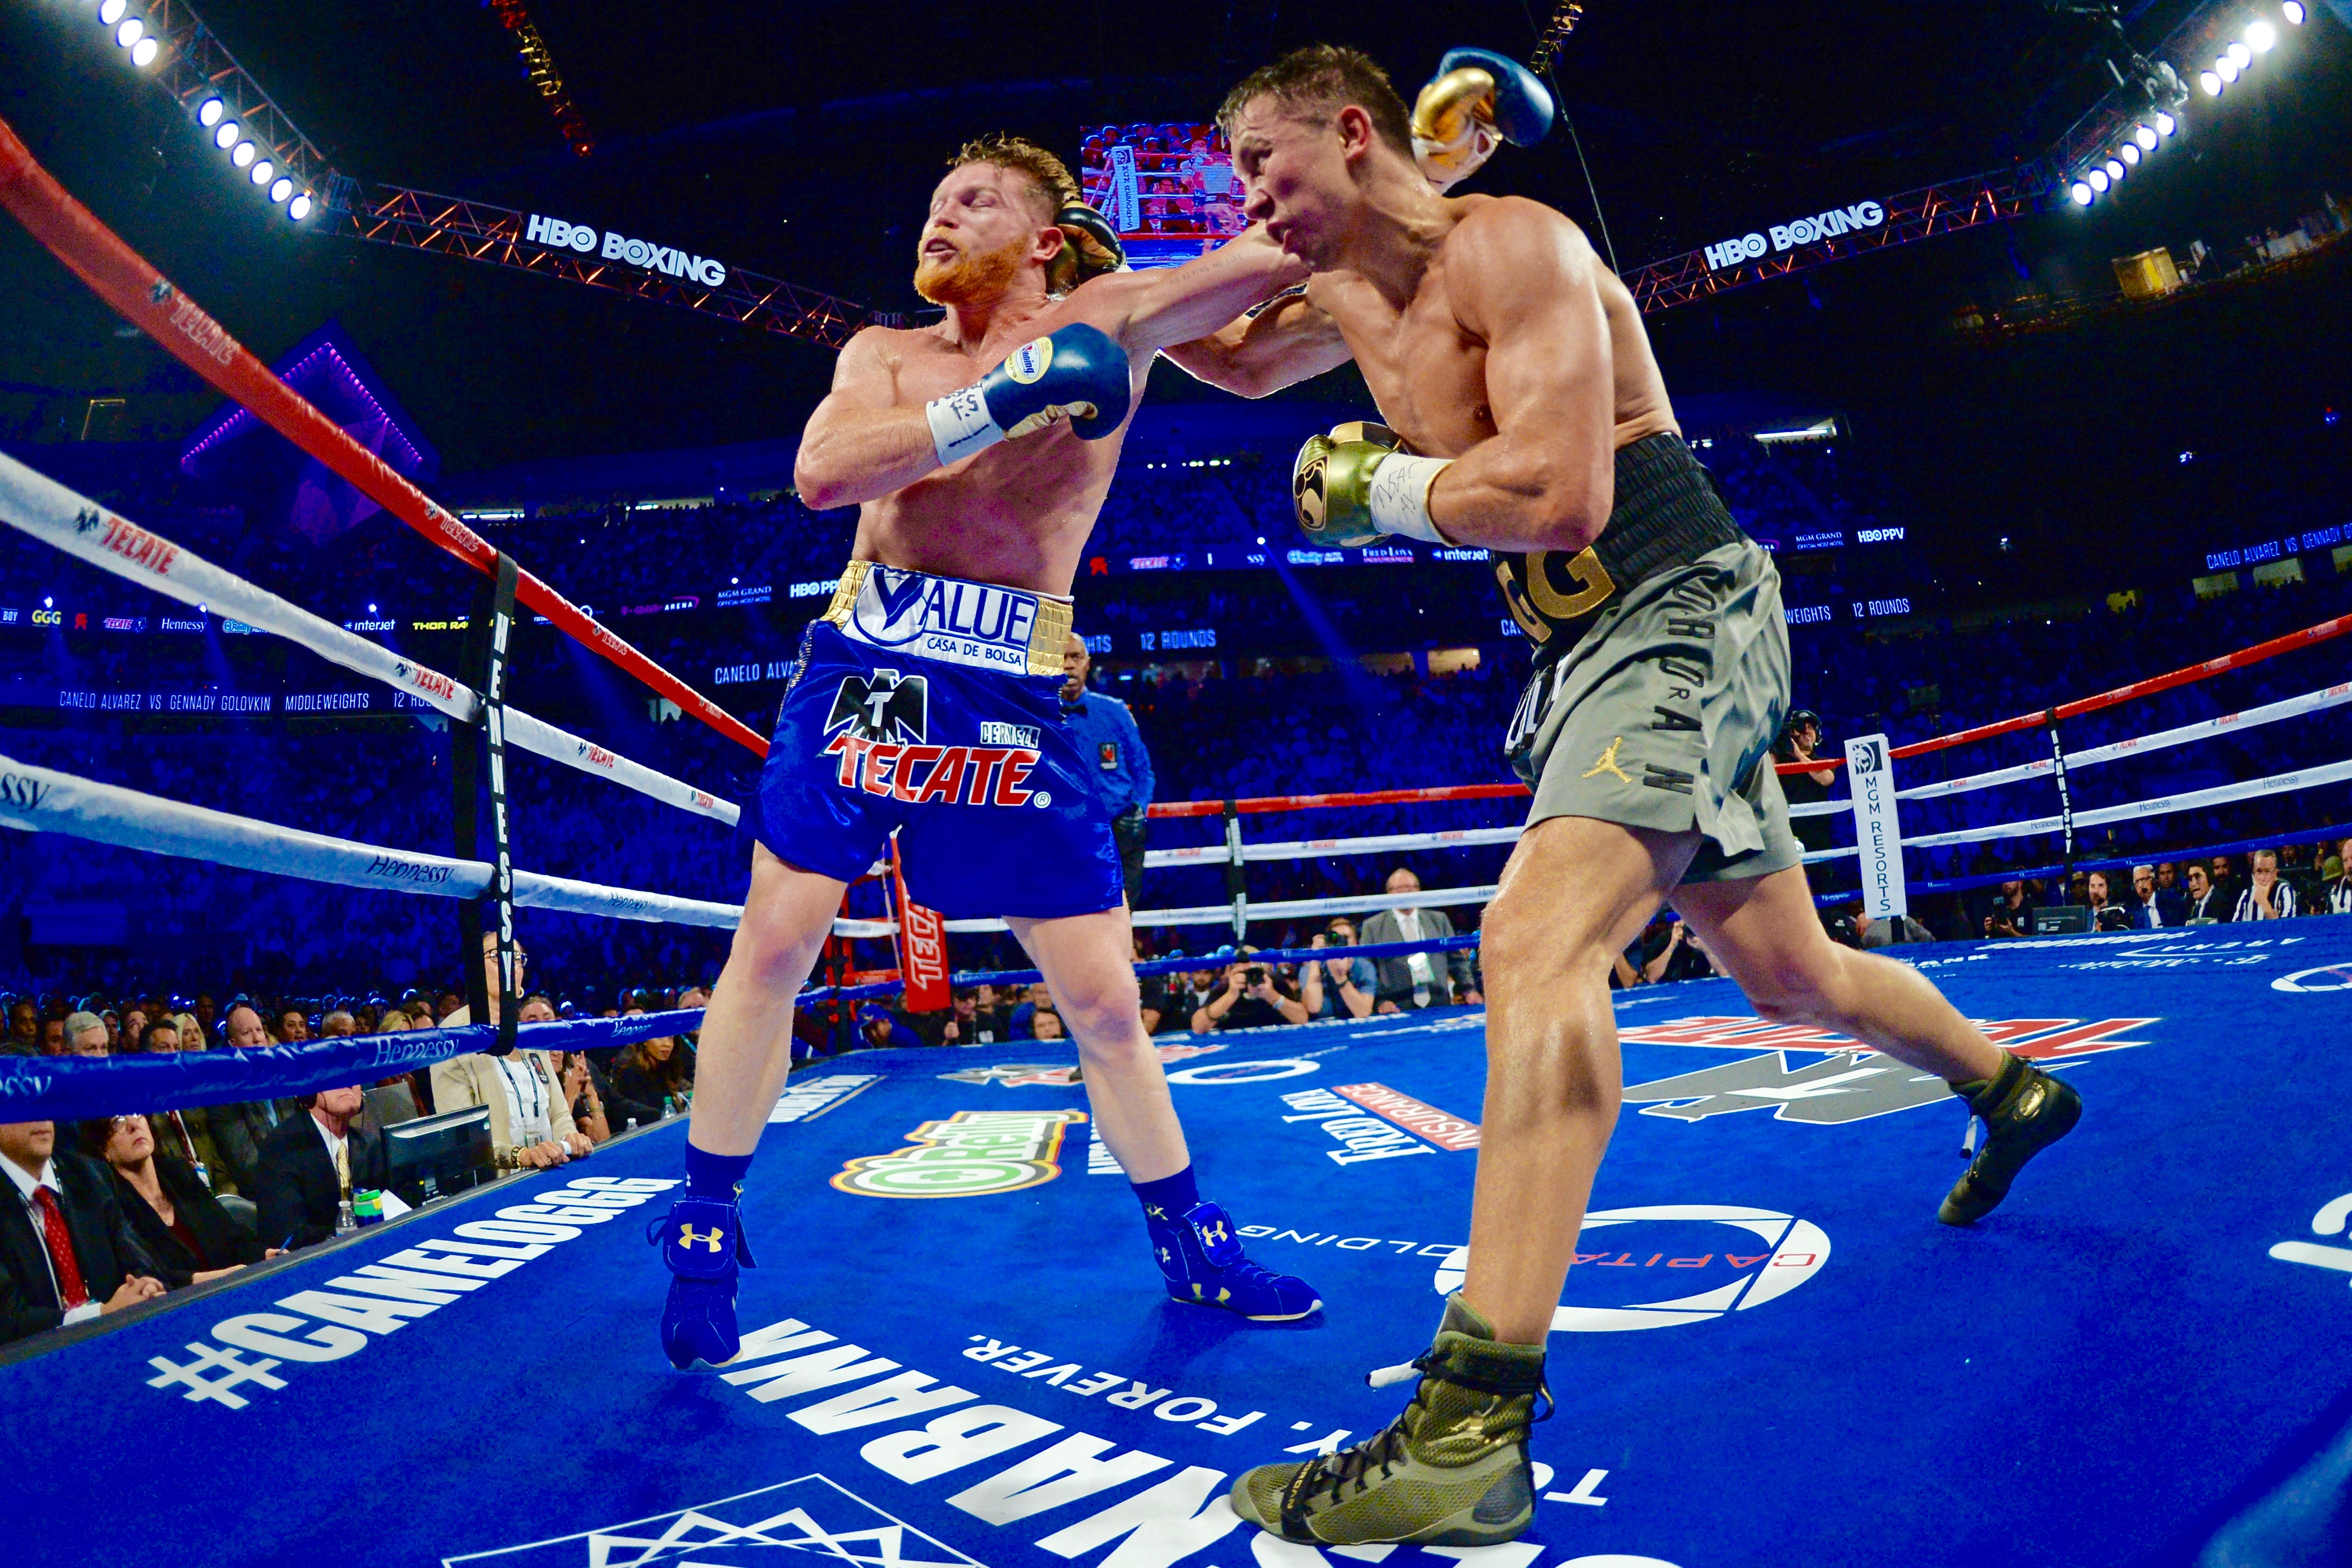 Canelo Alvarez vs. 'GGG' Gennady Golovkin: Live Round-by-Round Updates, Results and Highlights | News, Highlights, and | Bleacher Report